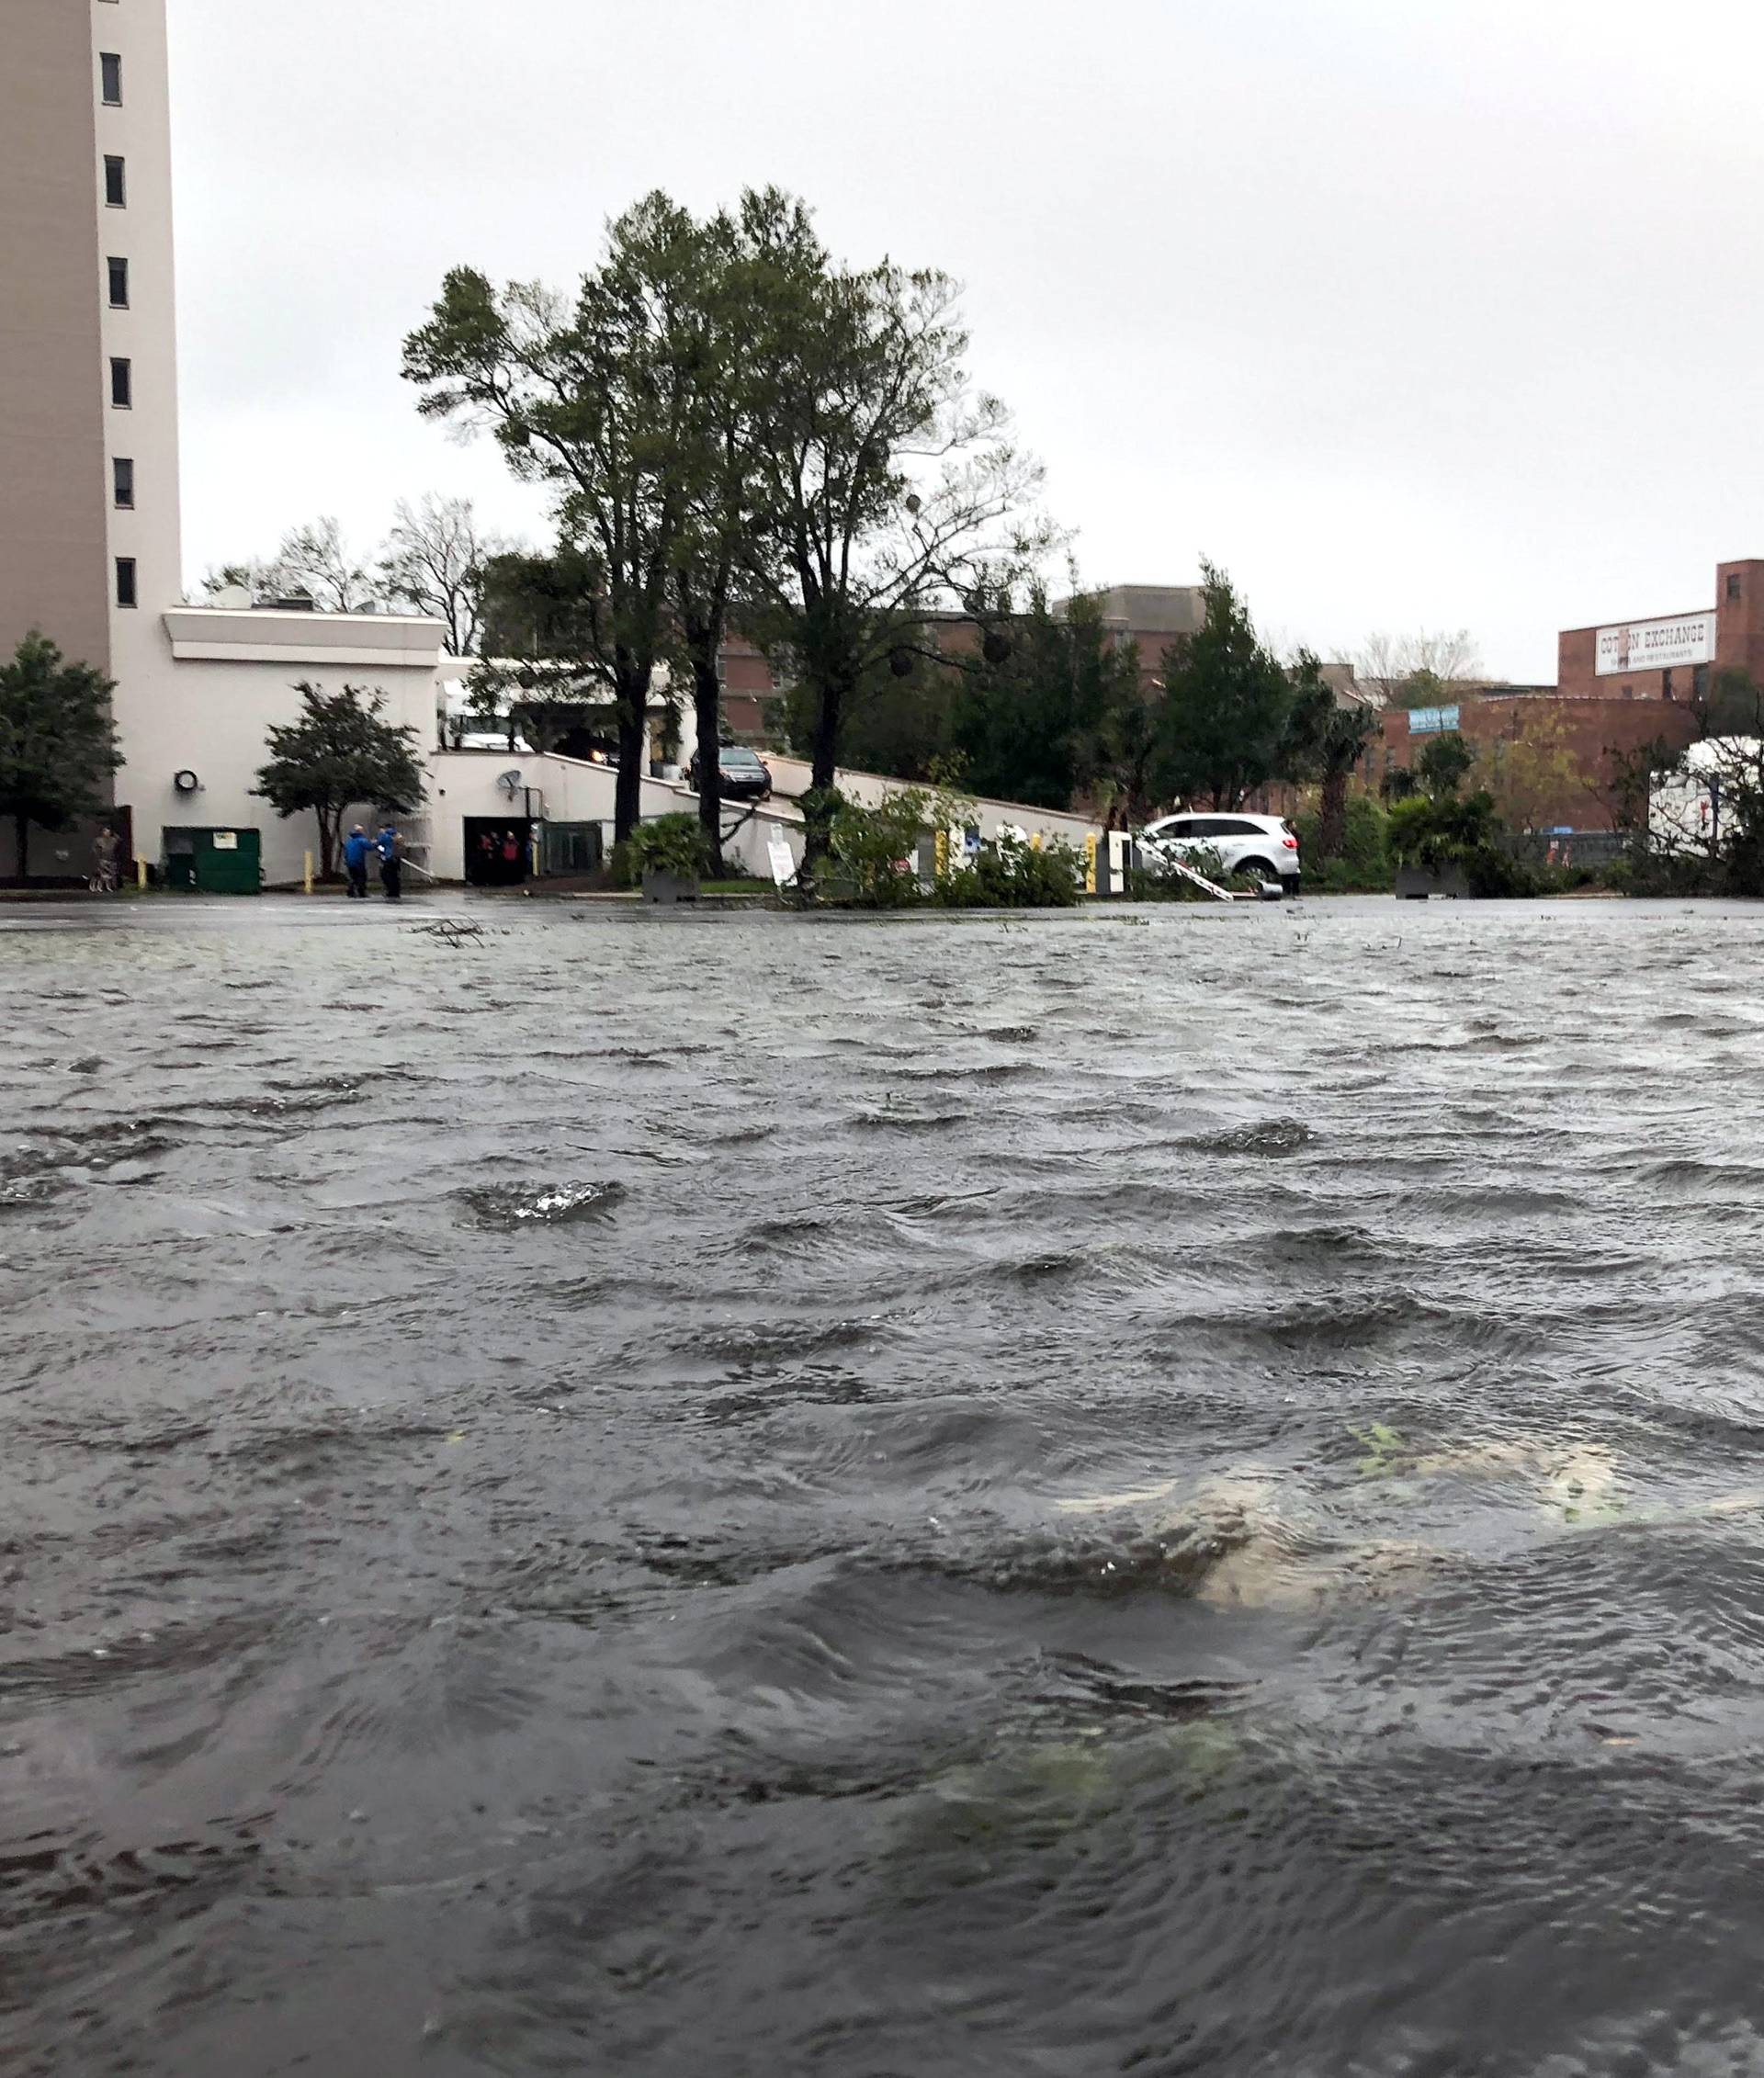 Rain water floods streets as Hurricane Florence moves into the Carolinas in Wilmington North Carolina